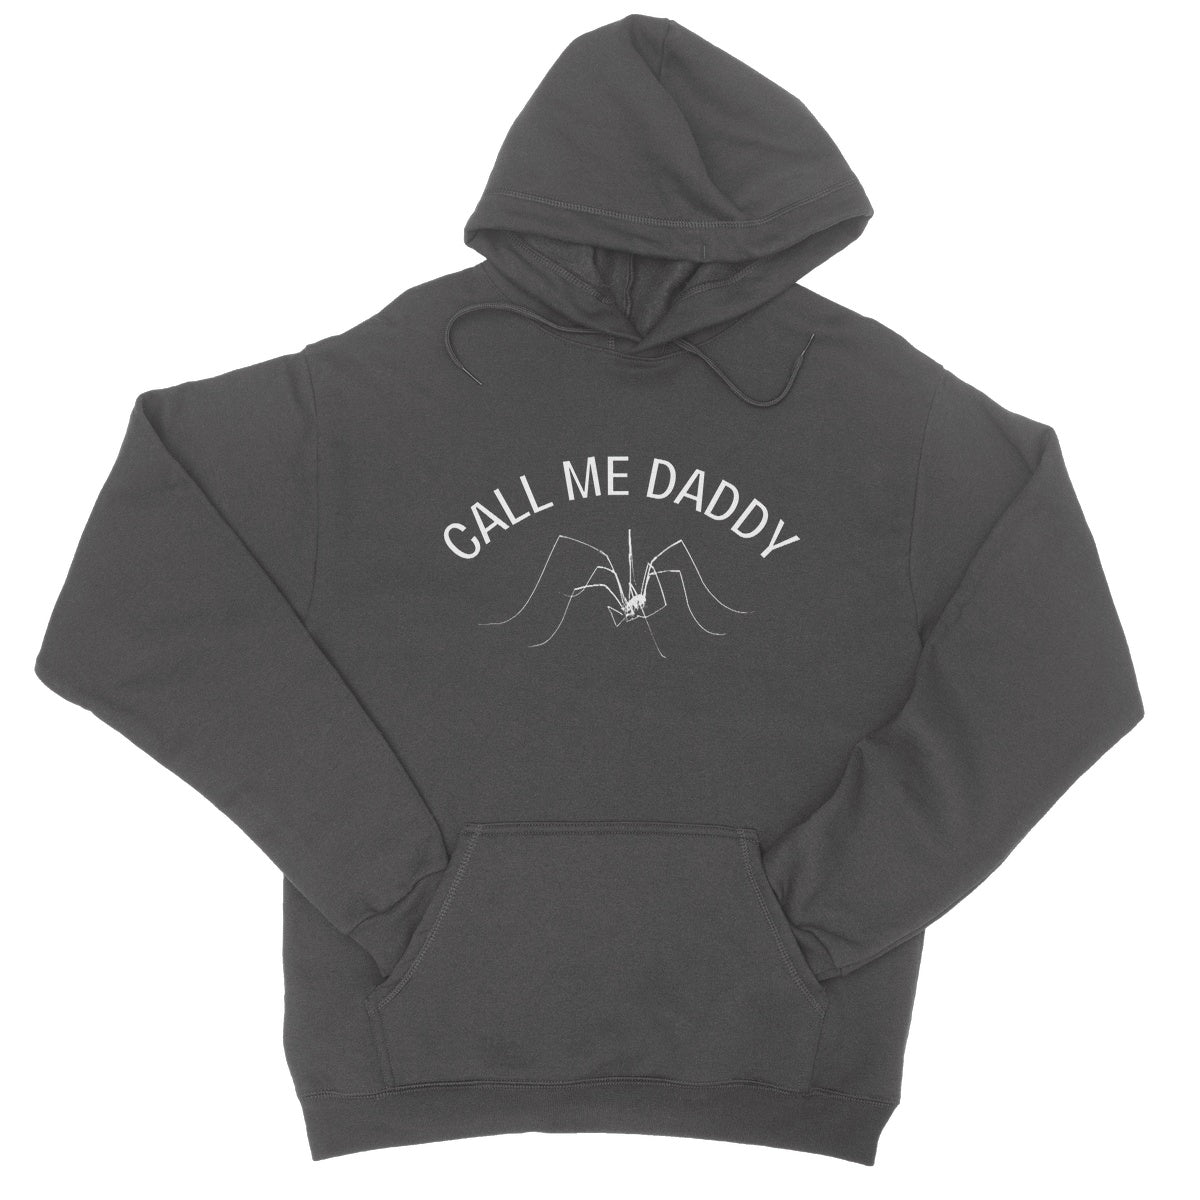 call me daddy hoodie grey